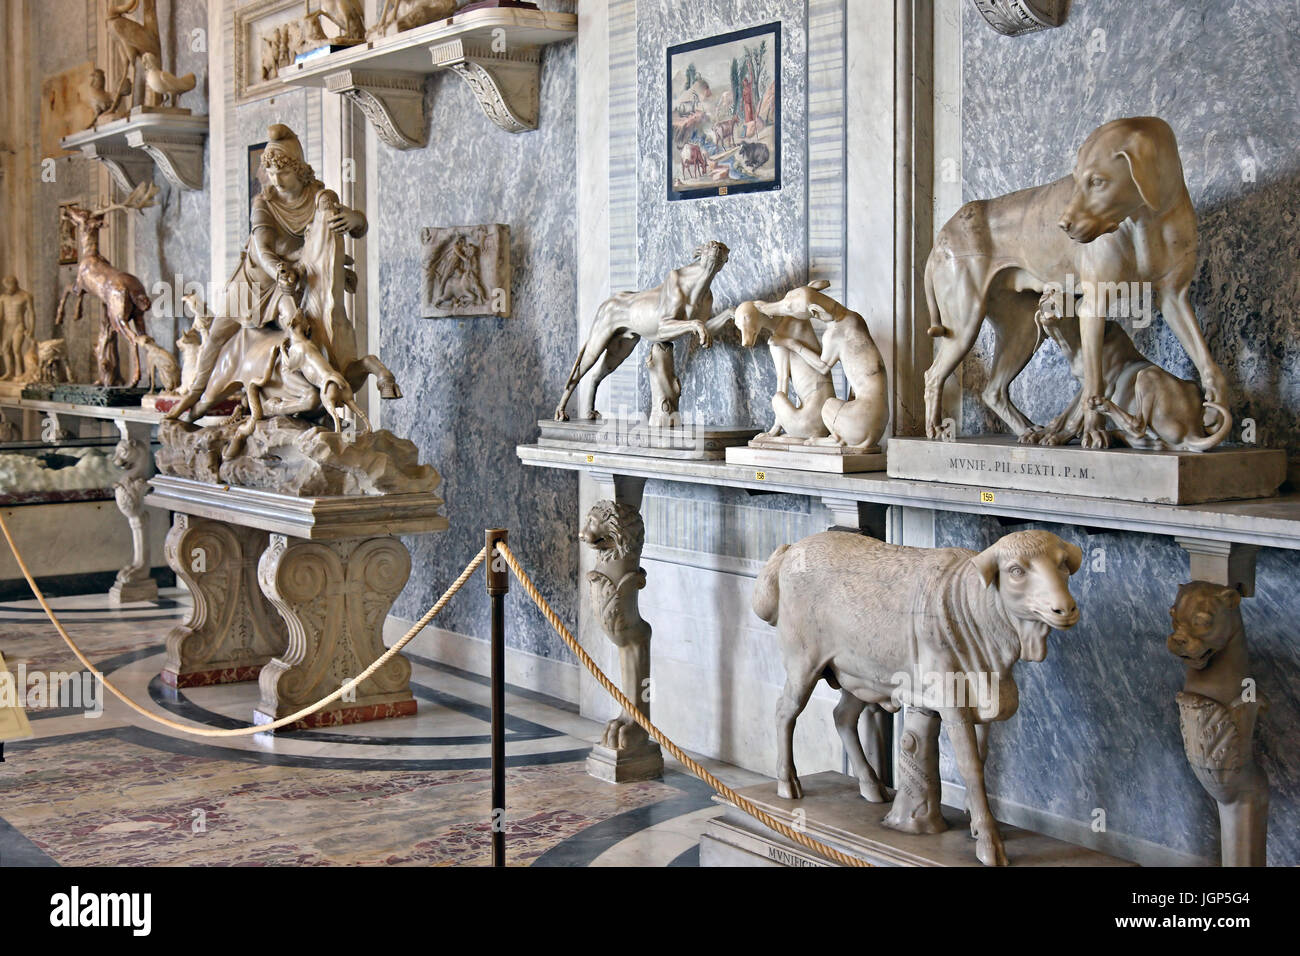 In 'Sala degli Animali' ('Hall of the Animals'), Museo Pio-Clementino, Vatican Museums, Vatican City. Stock Photo